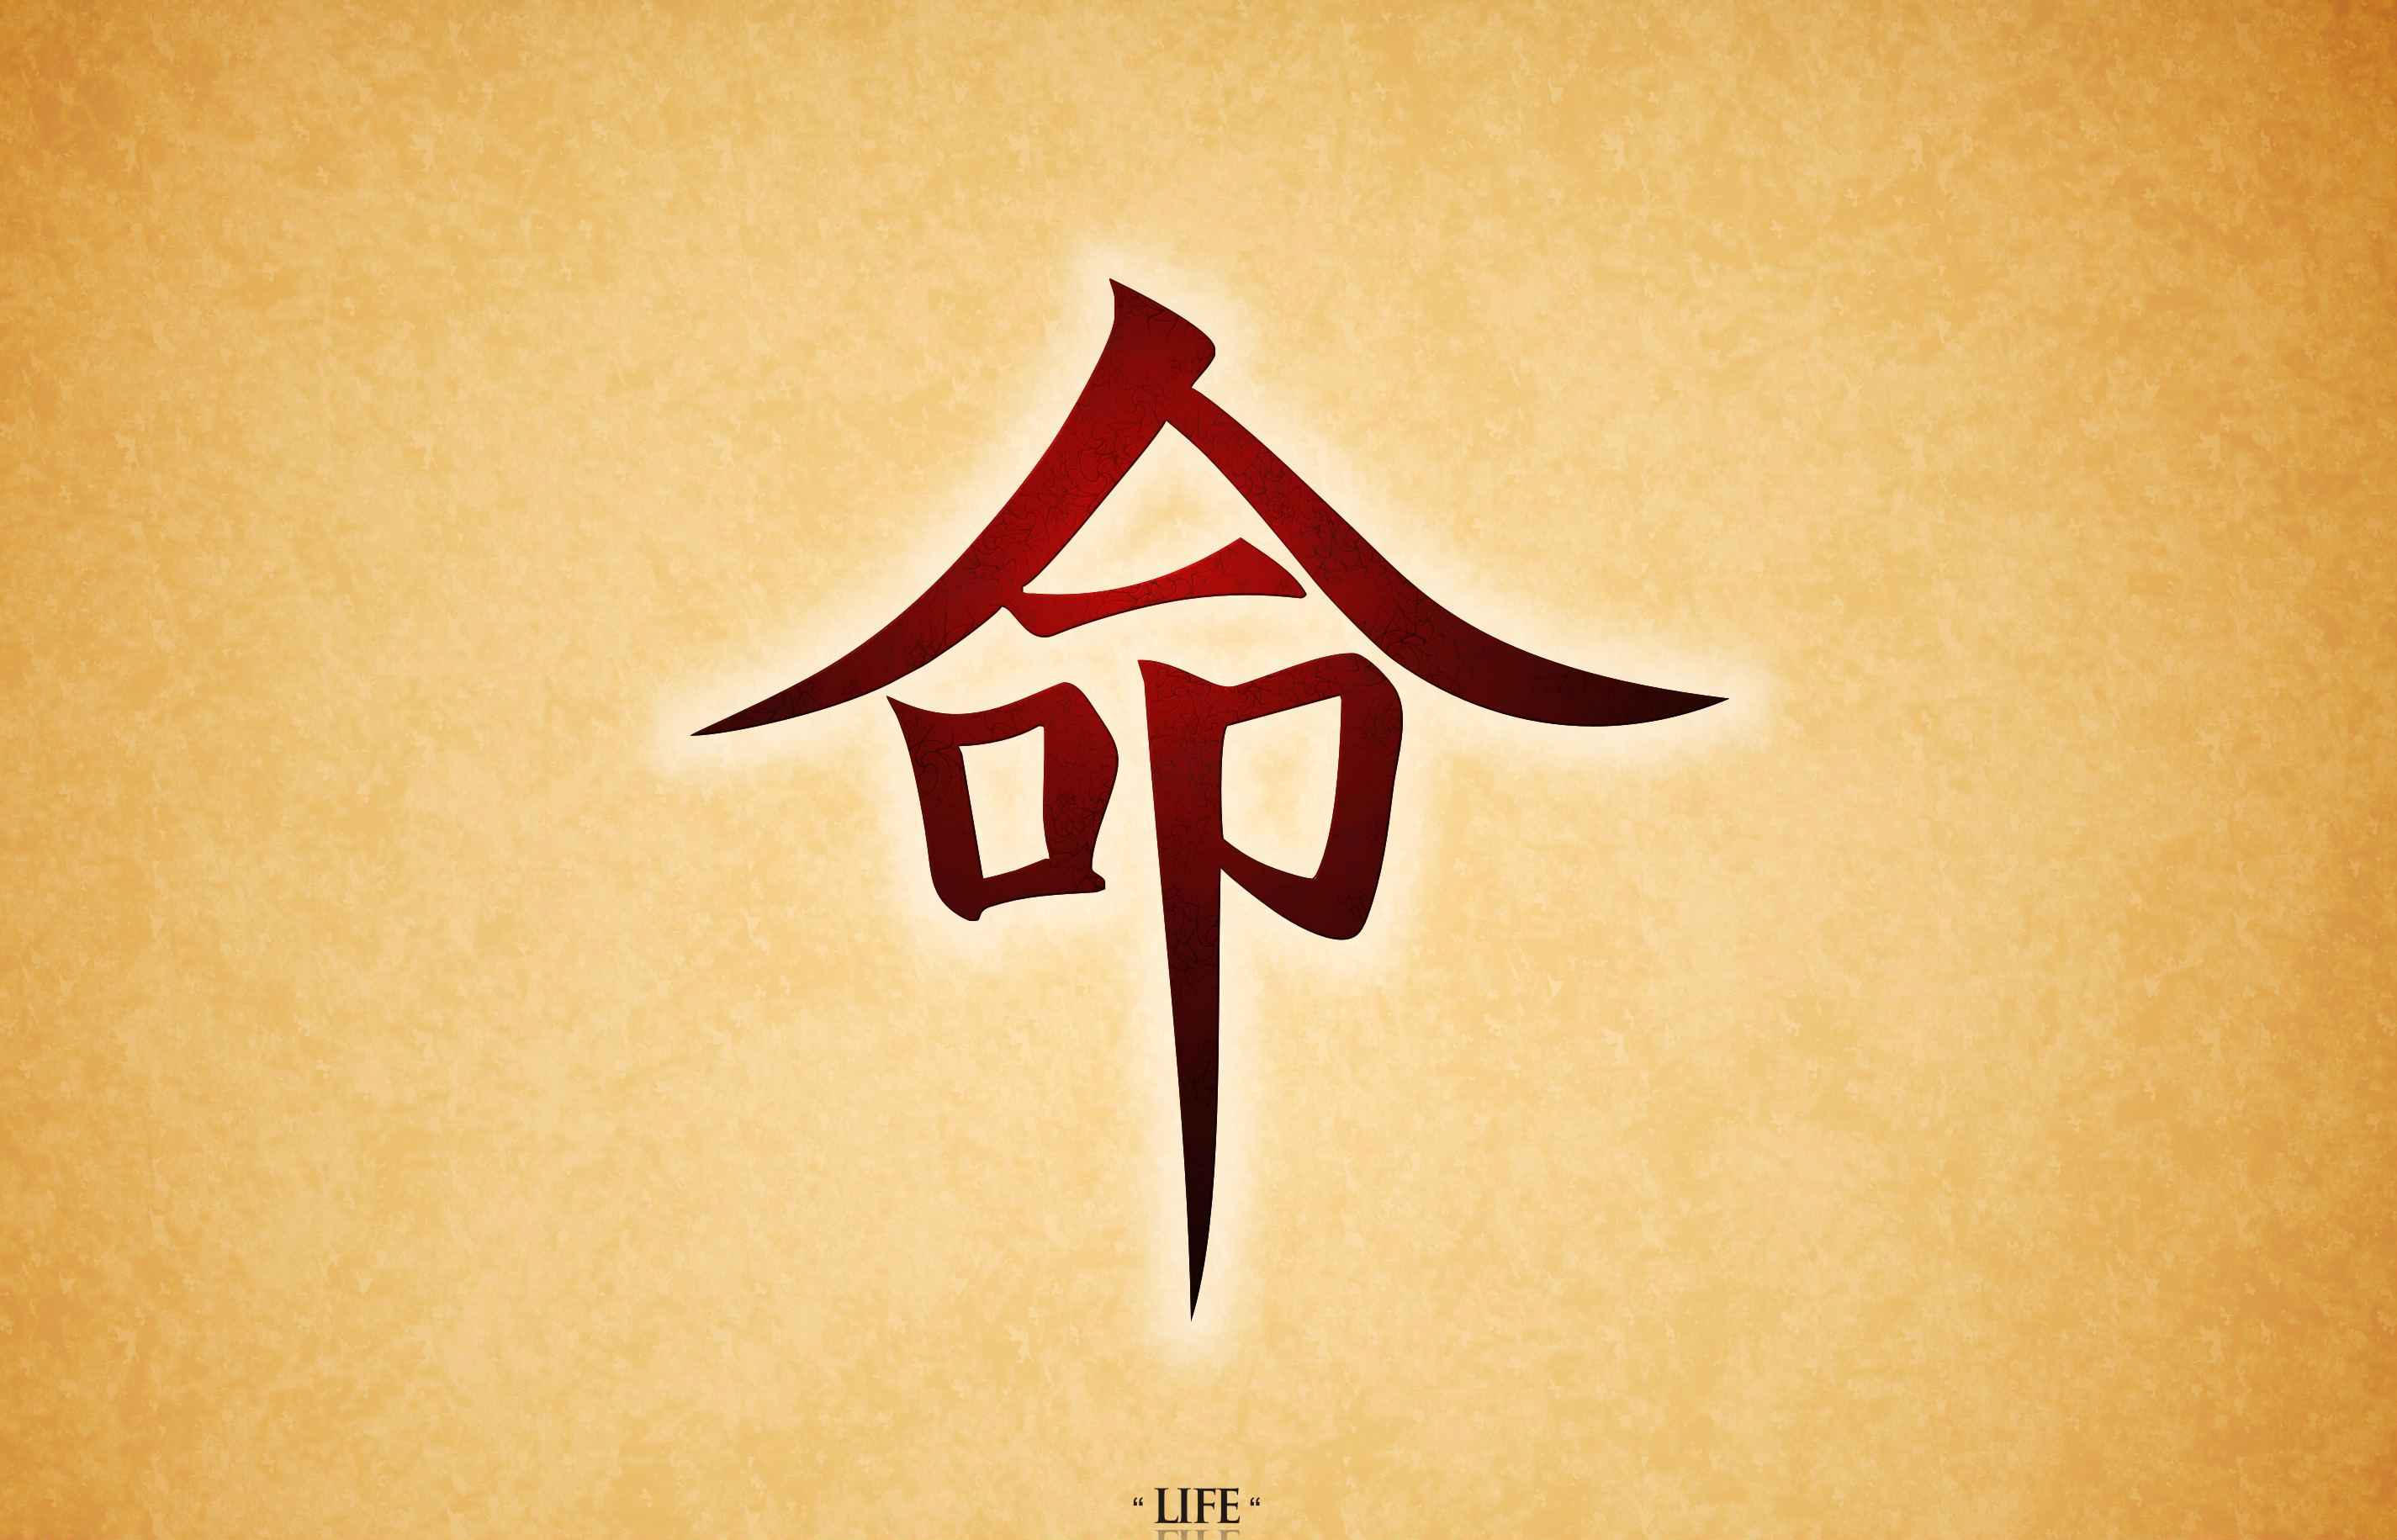 Chinese Symbol Wallpaper Images amp Pictures   Becuo